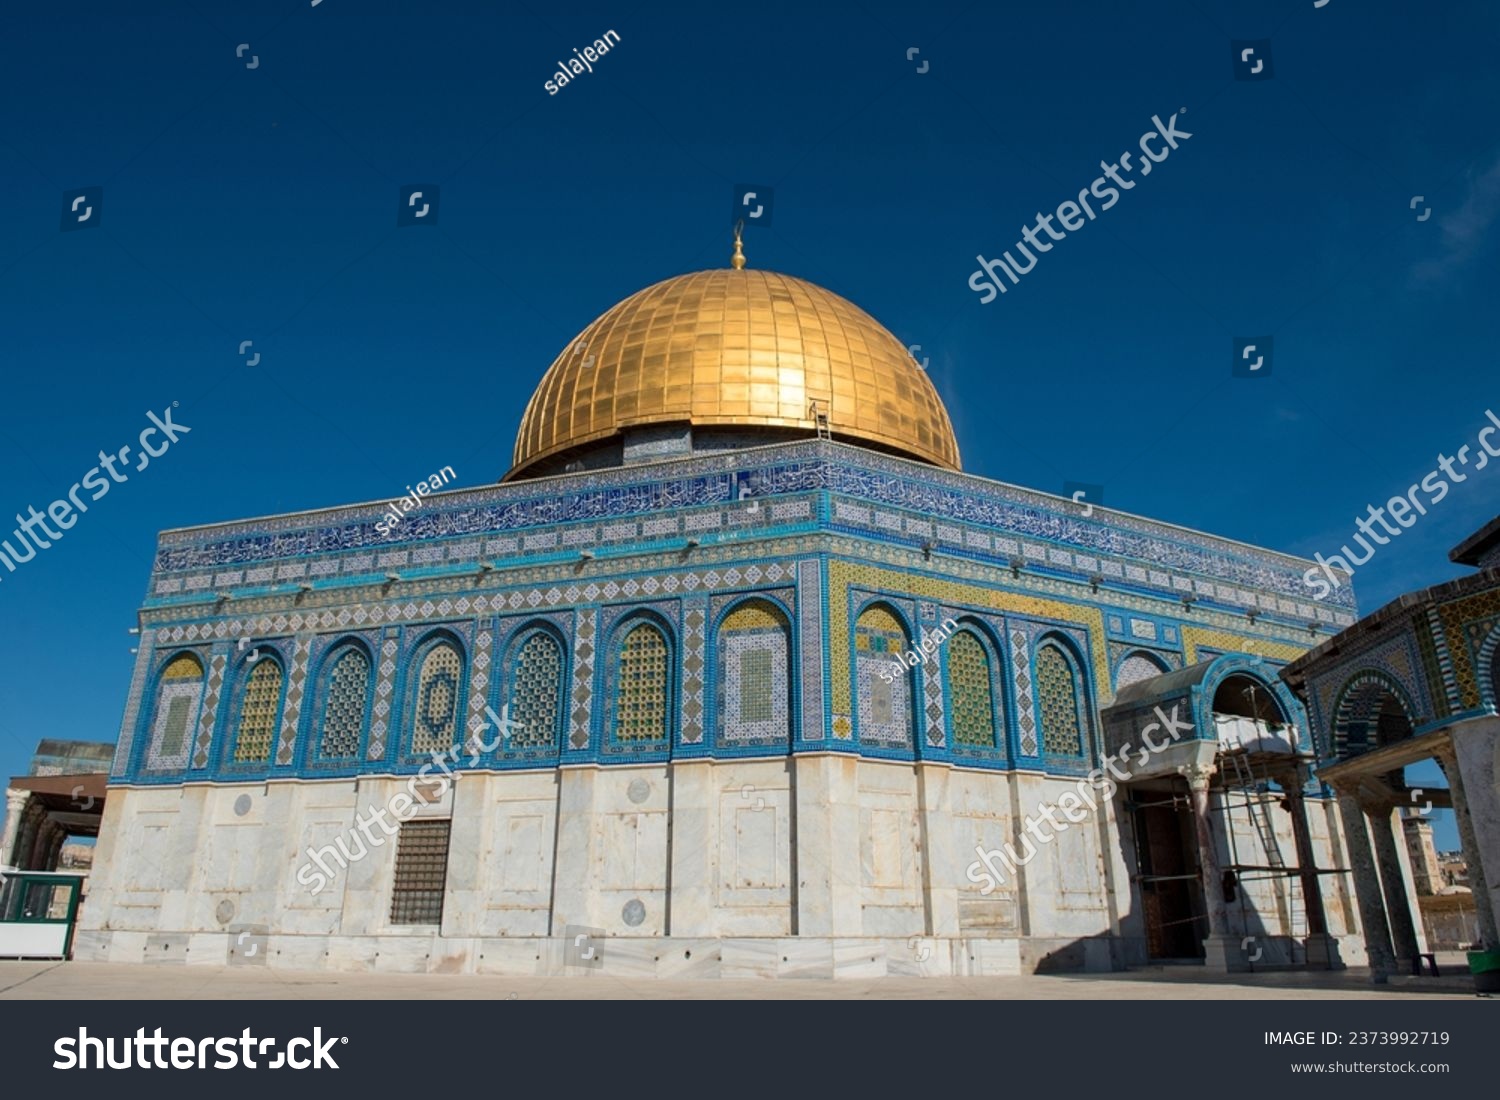 The Dome of the Rock, Temple Mount, al-Aqsa mosque, Jerusalem, Israel. The place is a conflict between Hamas, Palestinians and Israeli forces #2373992719